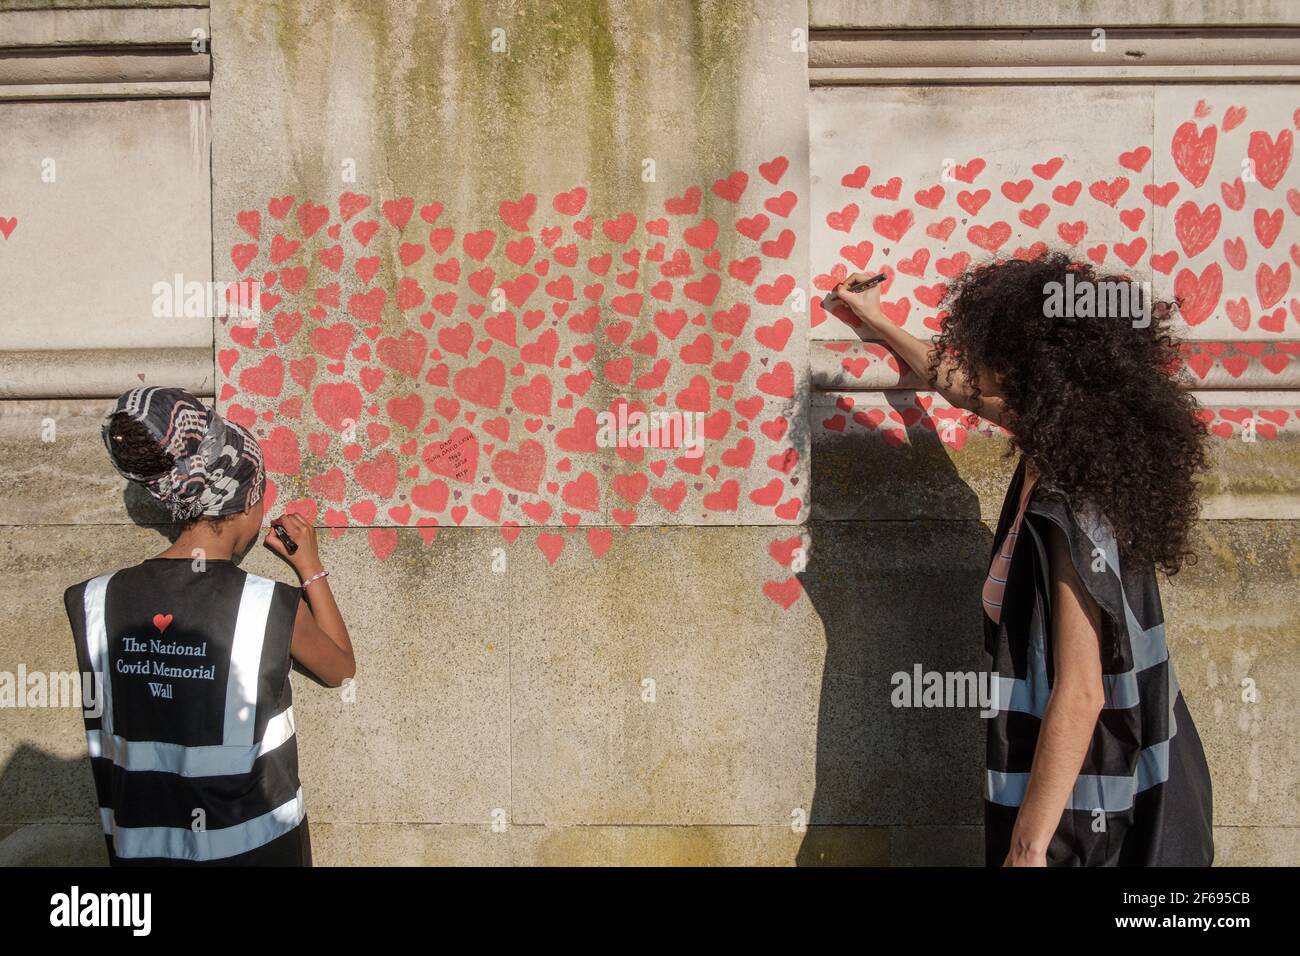 Day 2 of the National Covid Memorial Wall; More hearts have been added and more names have been included as a dedication to those who passed from Corona Stock Photo